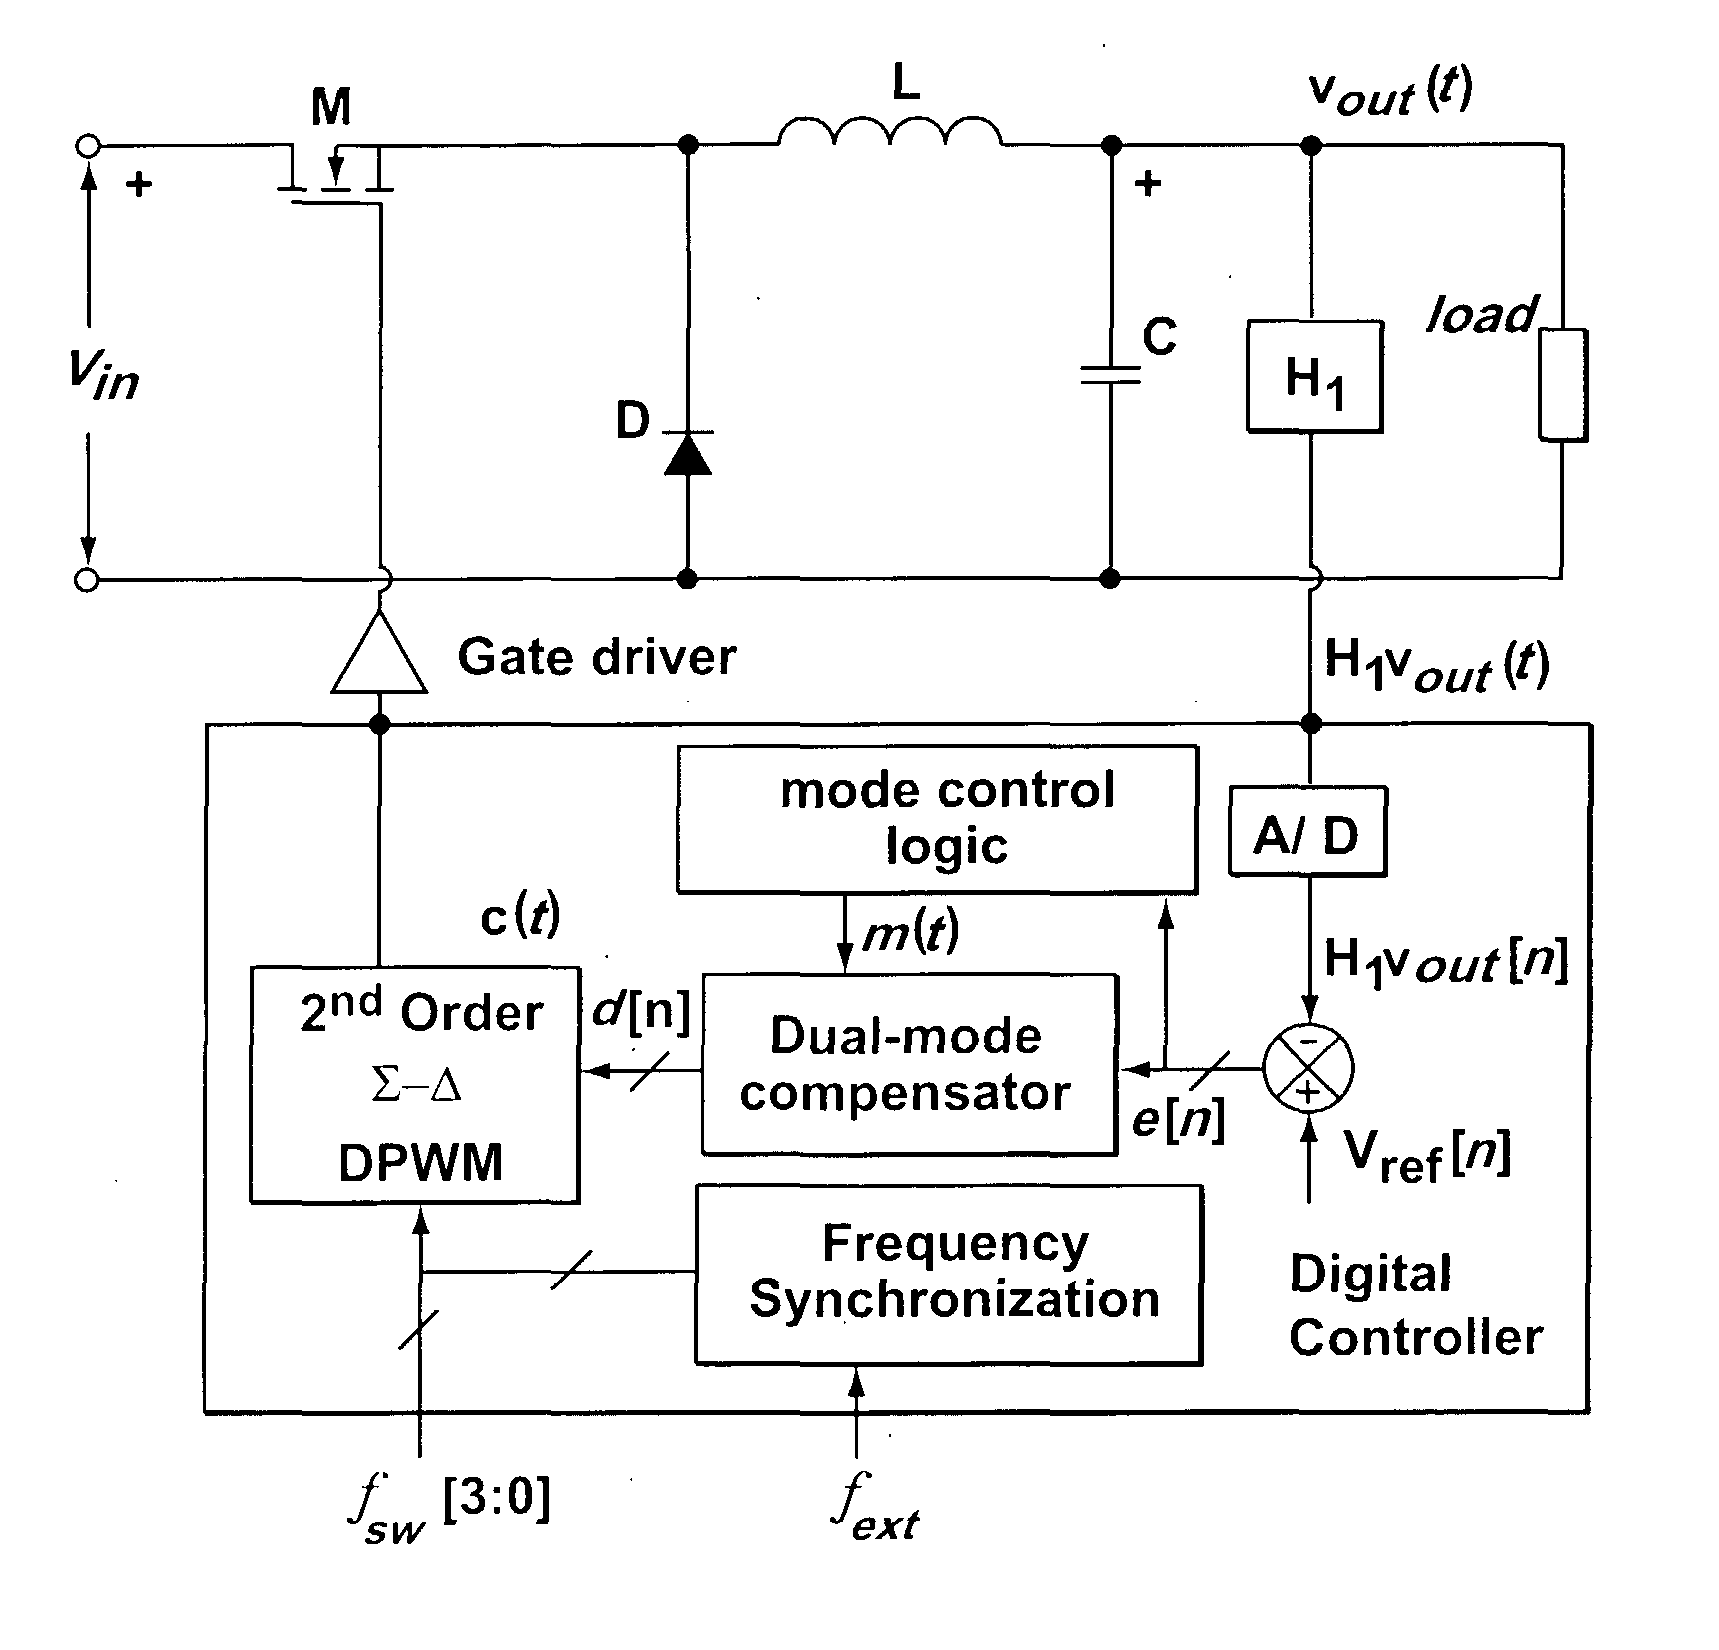 Digital Controller for Dc-Dc Switching Converters for Operation at Ultra-High Constant Switching Frequencies